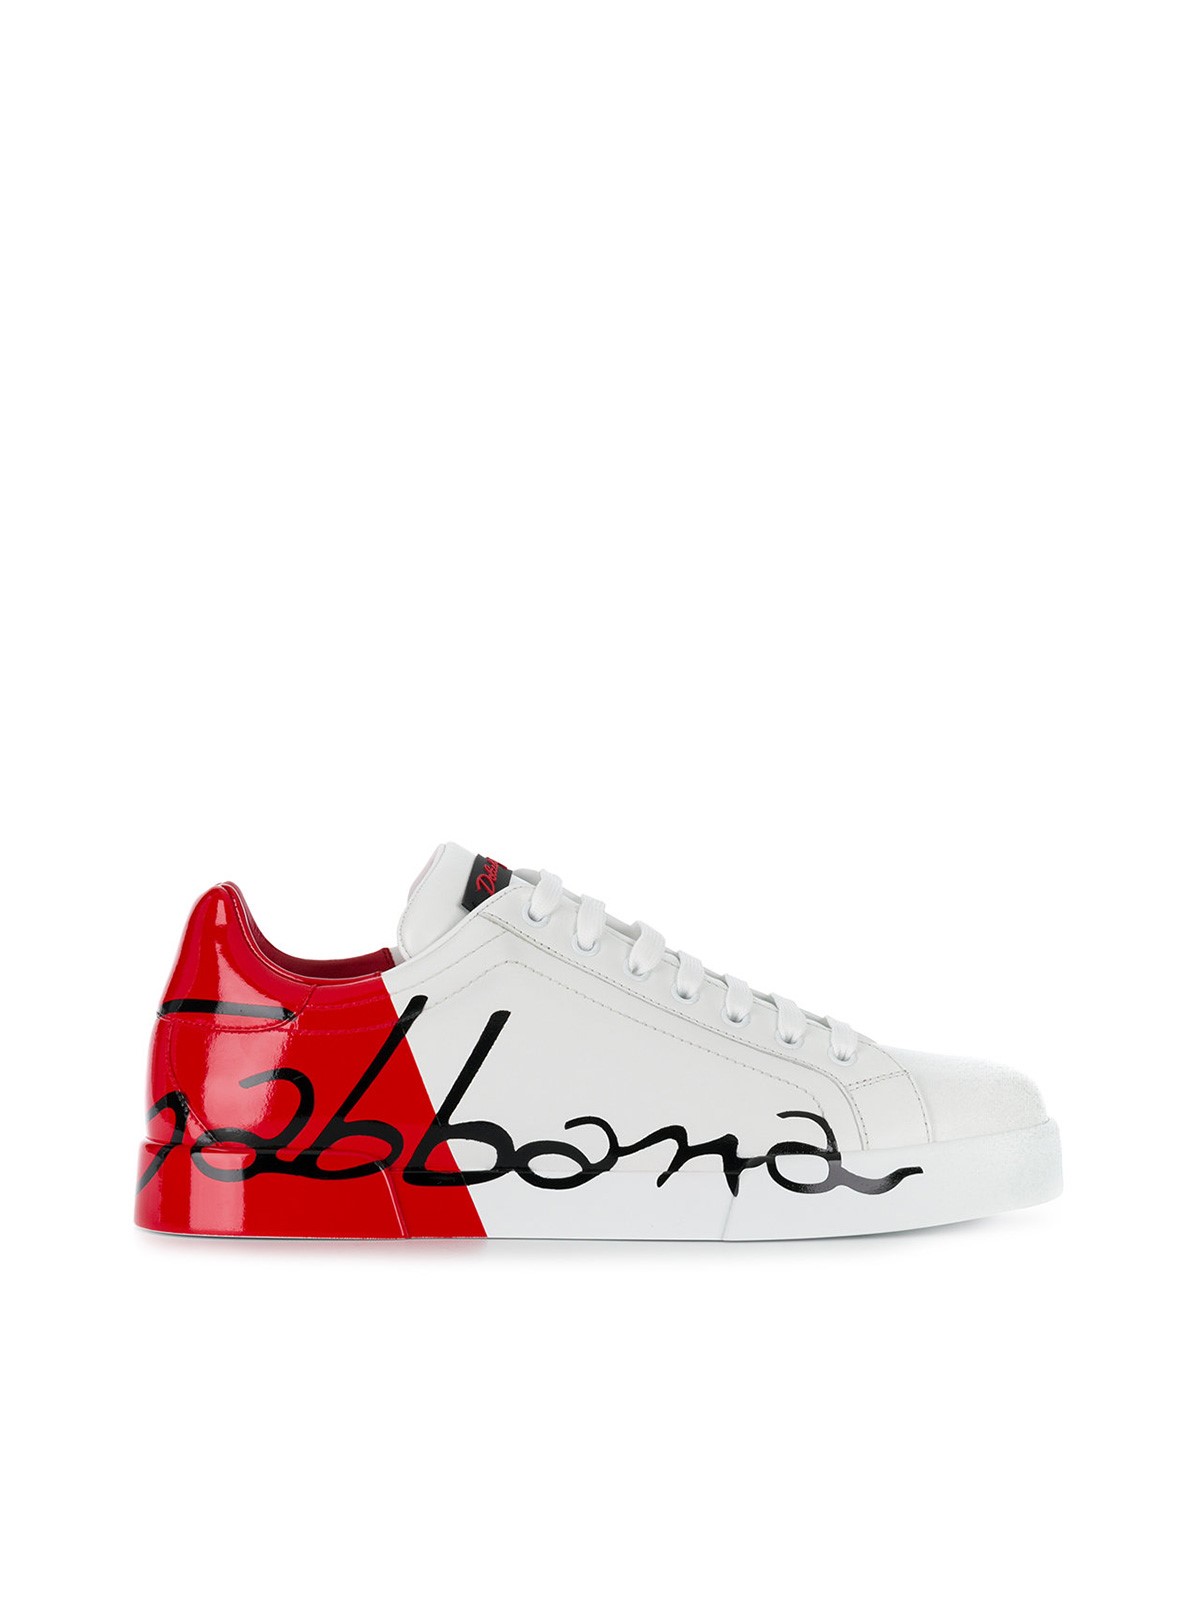 dolce \u0026 gabbana SNEAKERS available on montiboutique.com - 23187